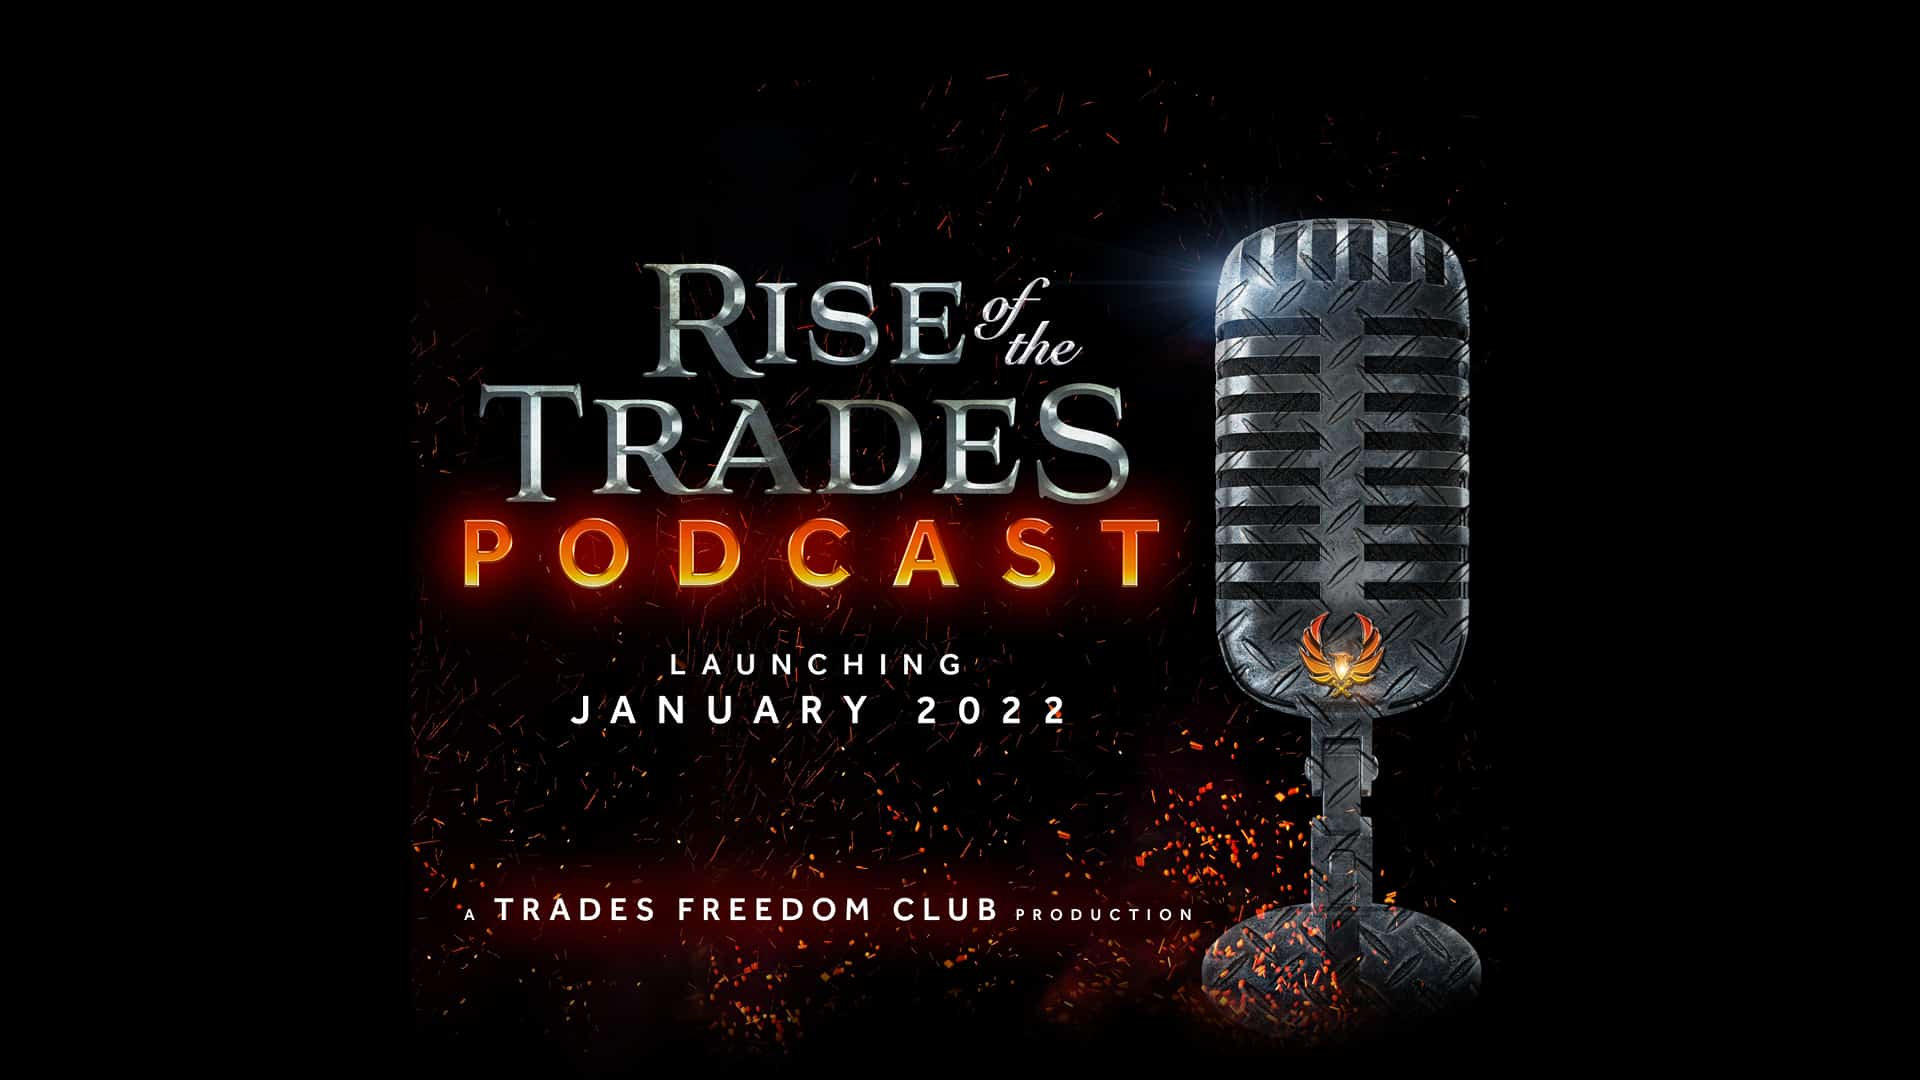 Rise of the Trades Podcast complete image